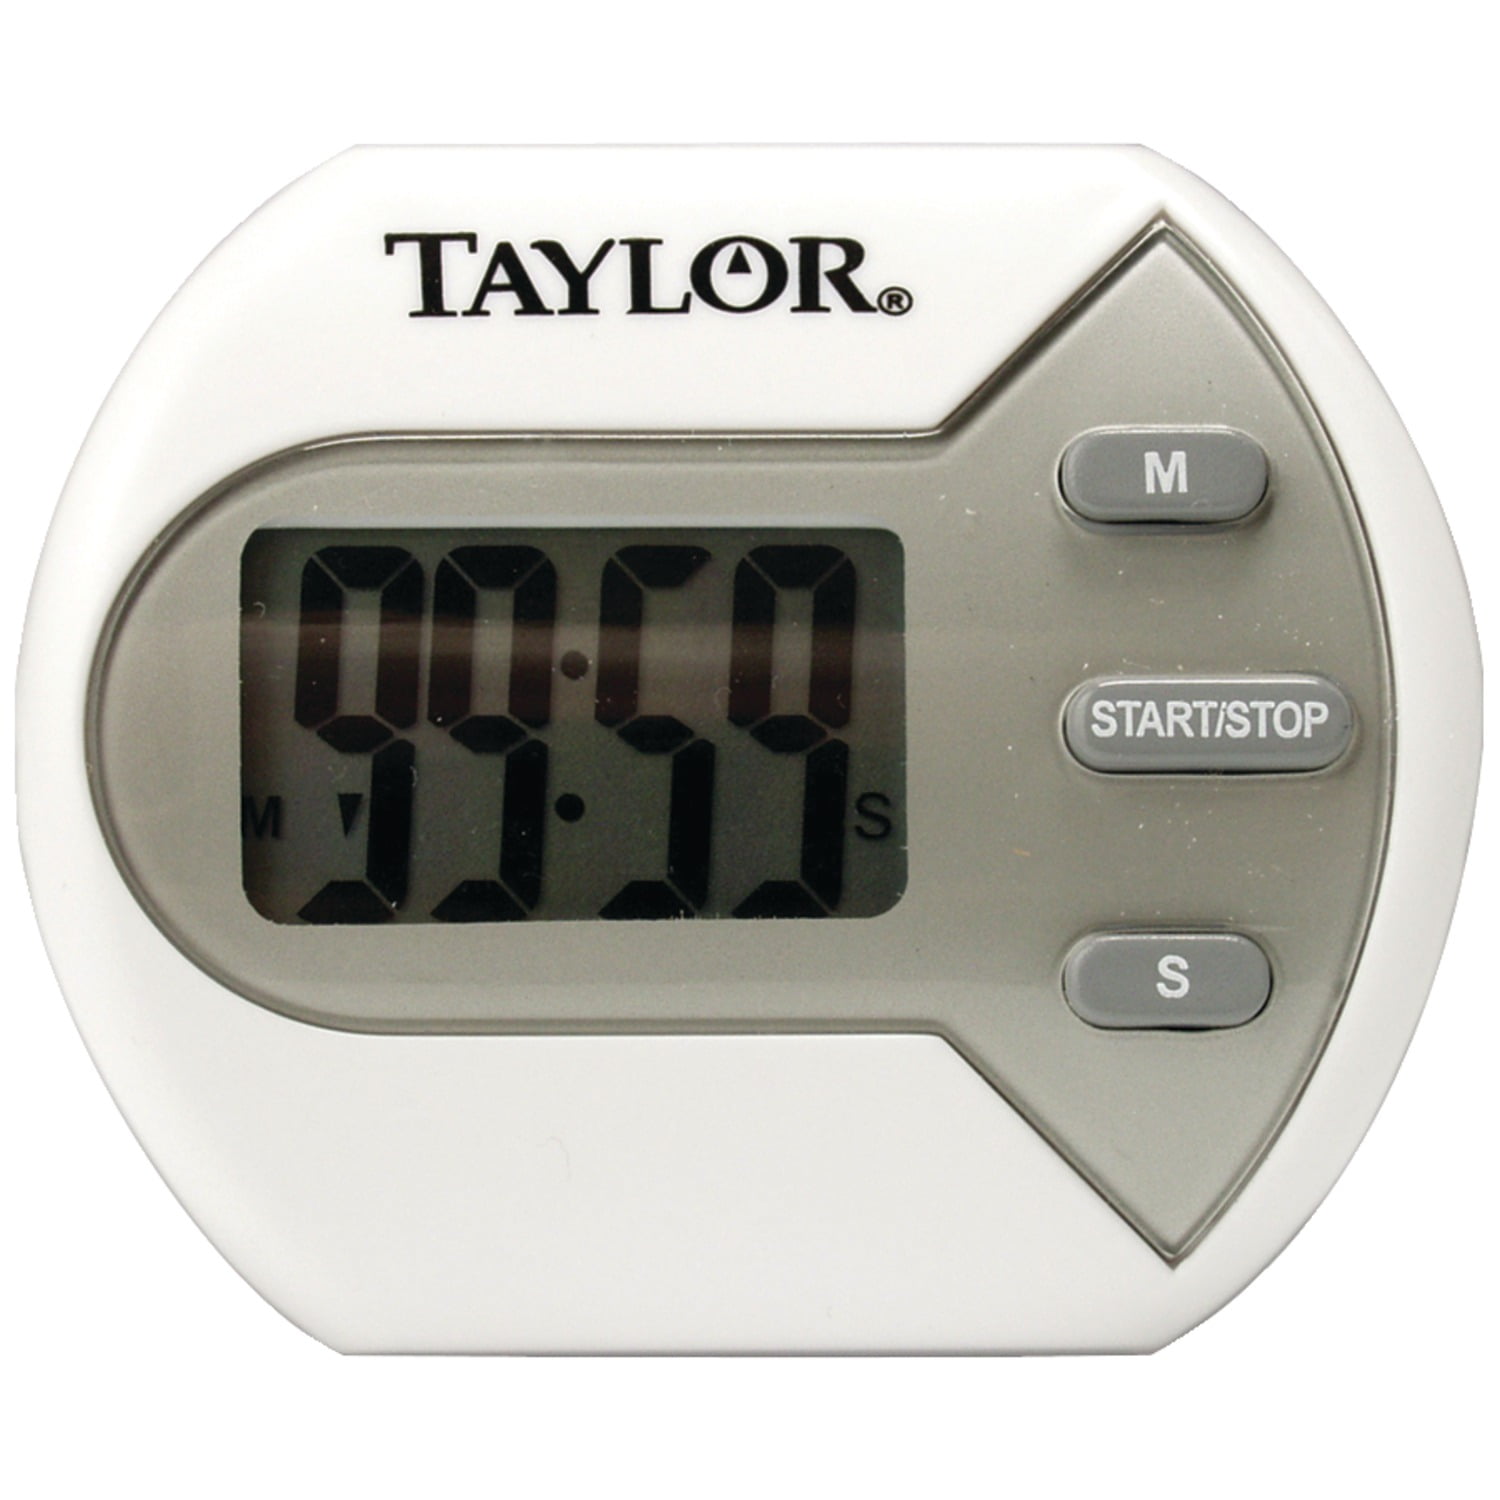 clip magnet stand NEW COMPACT TIMER Taylor 5806 digital battery operated